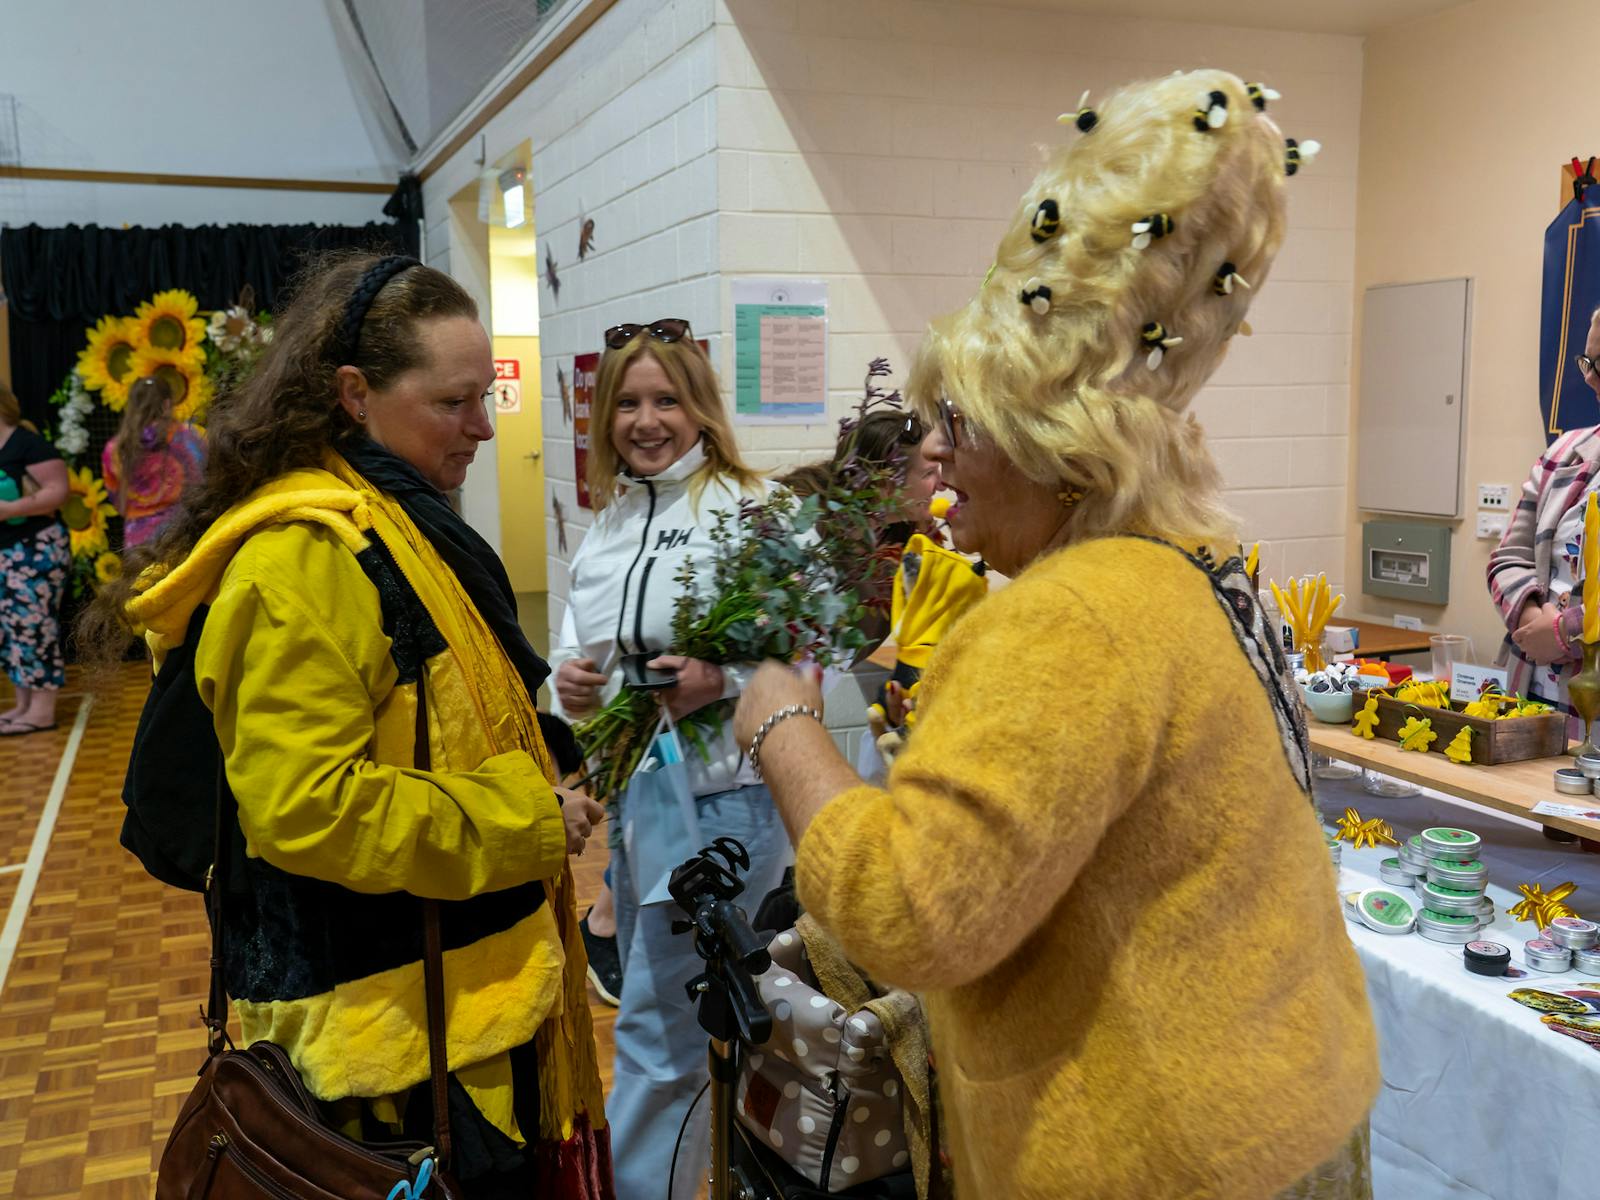 Lady with Beehive hairdo and bees on her wig